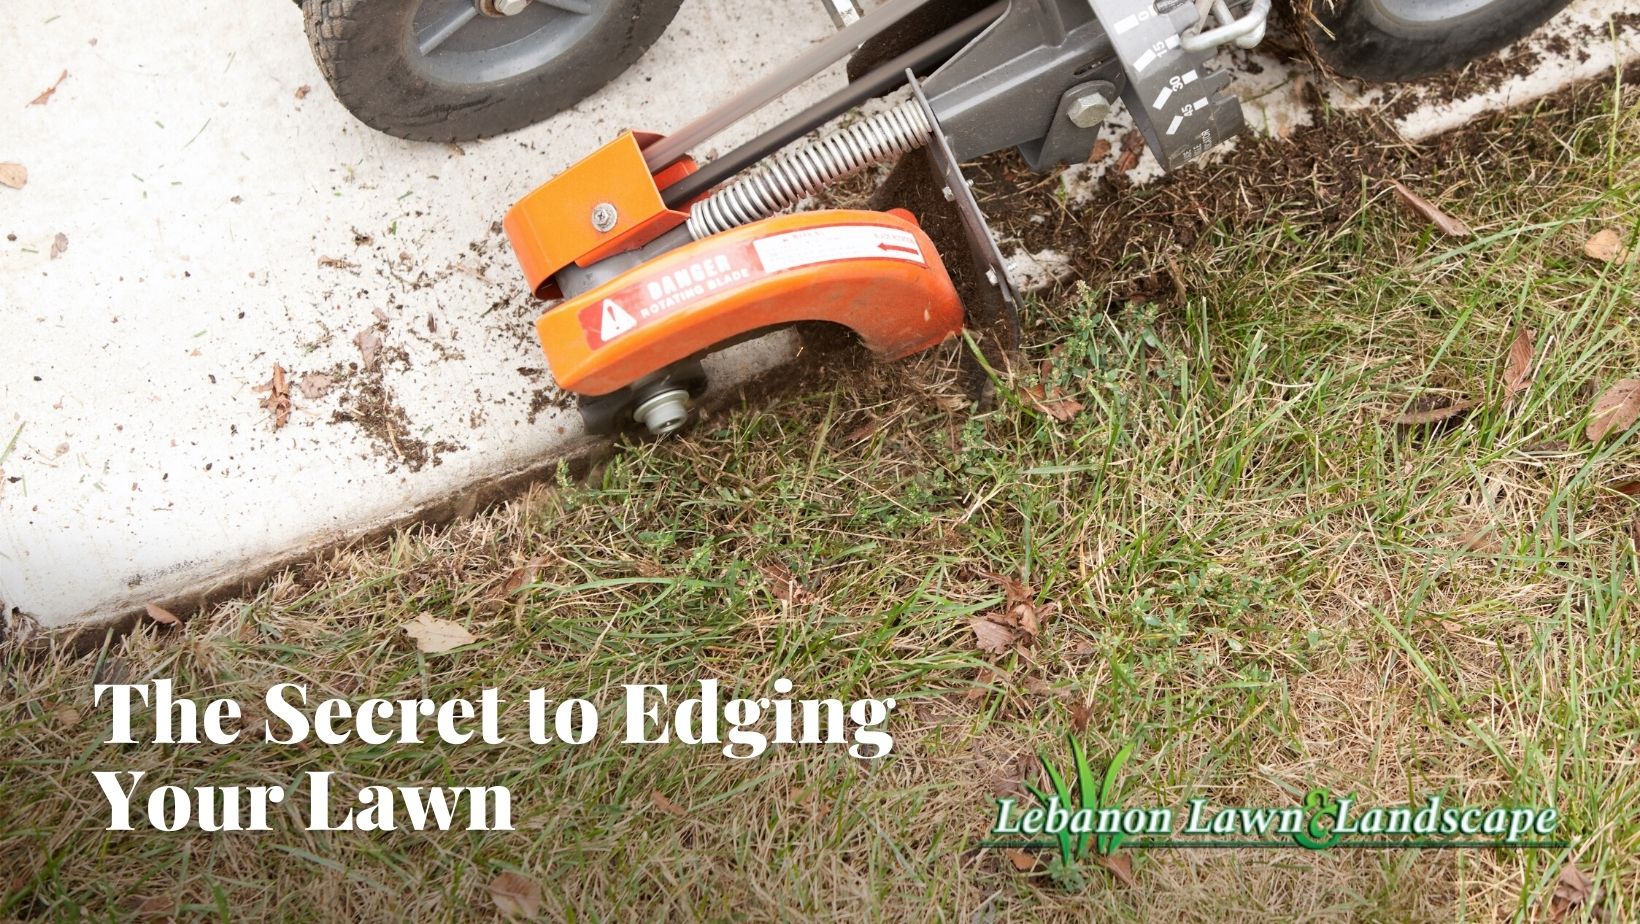 Edging your lawn